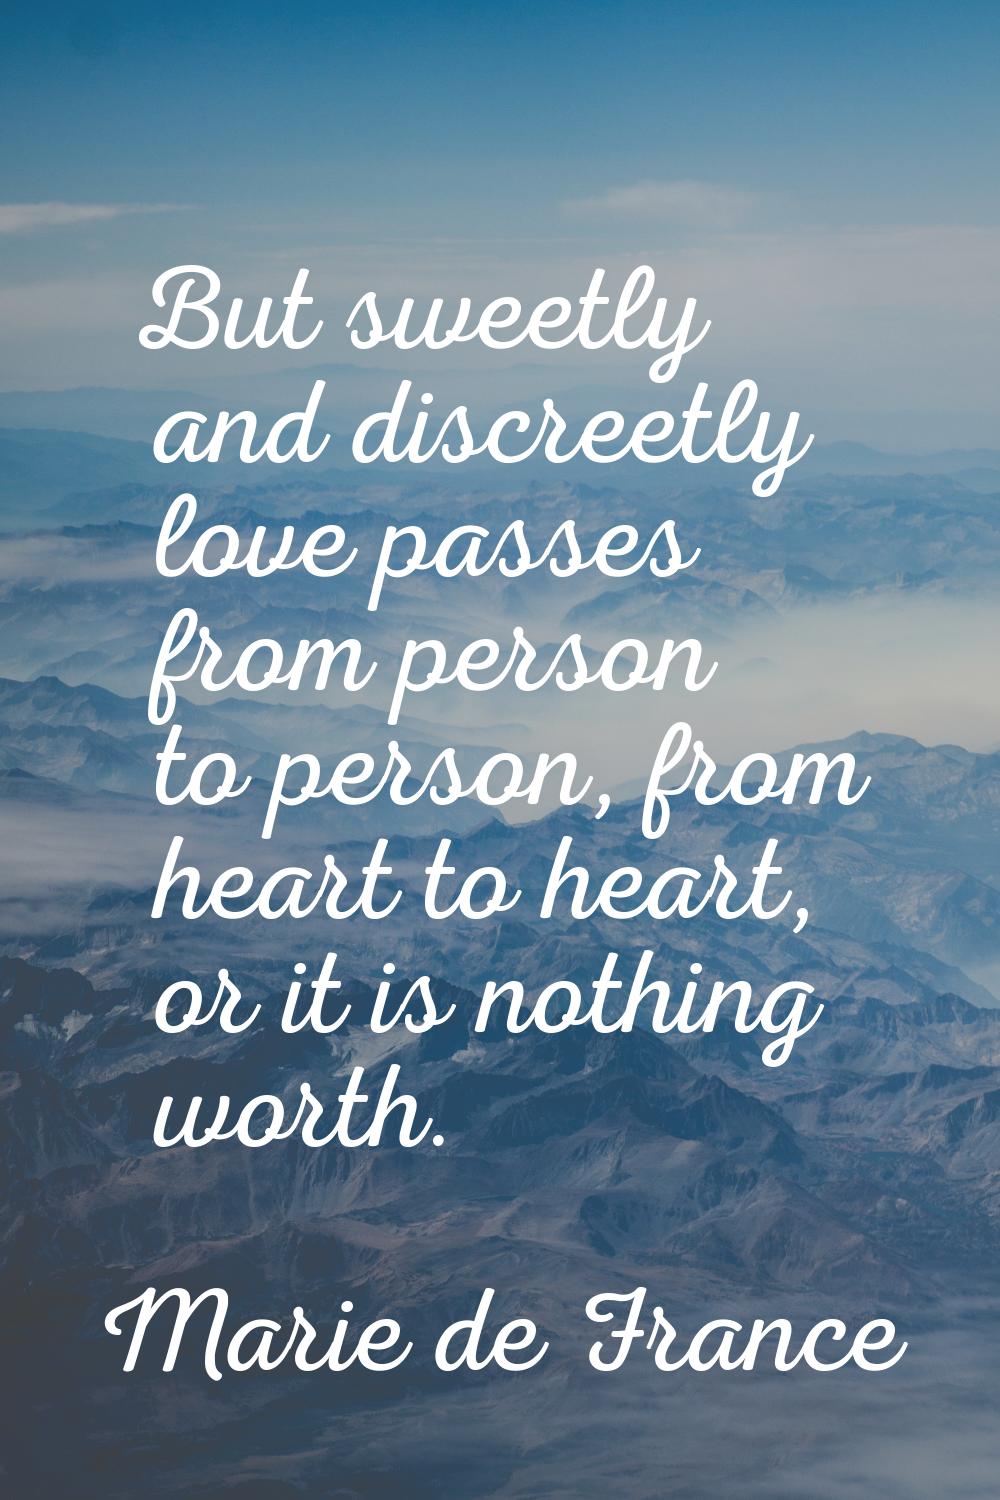 But sweetly and discreetly love passes from person to person, from heart to heart, or it is nothing